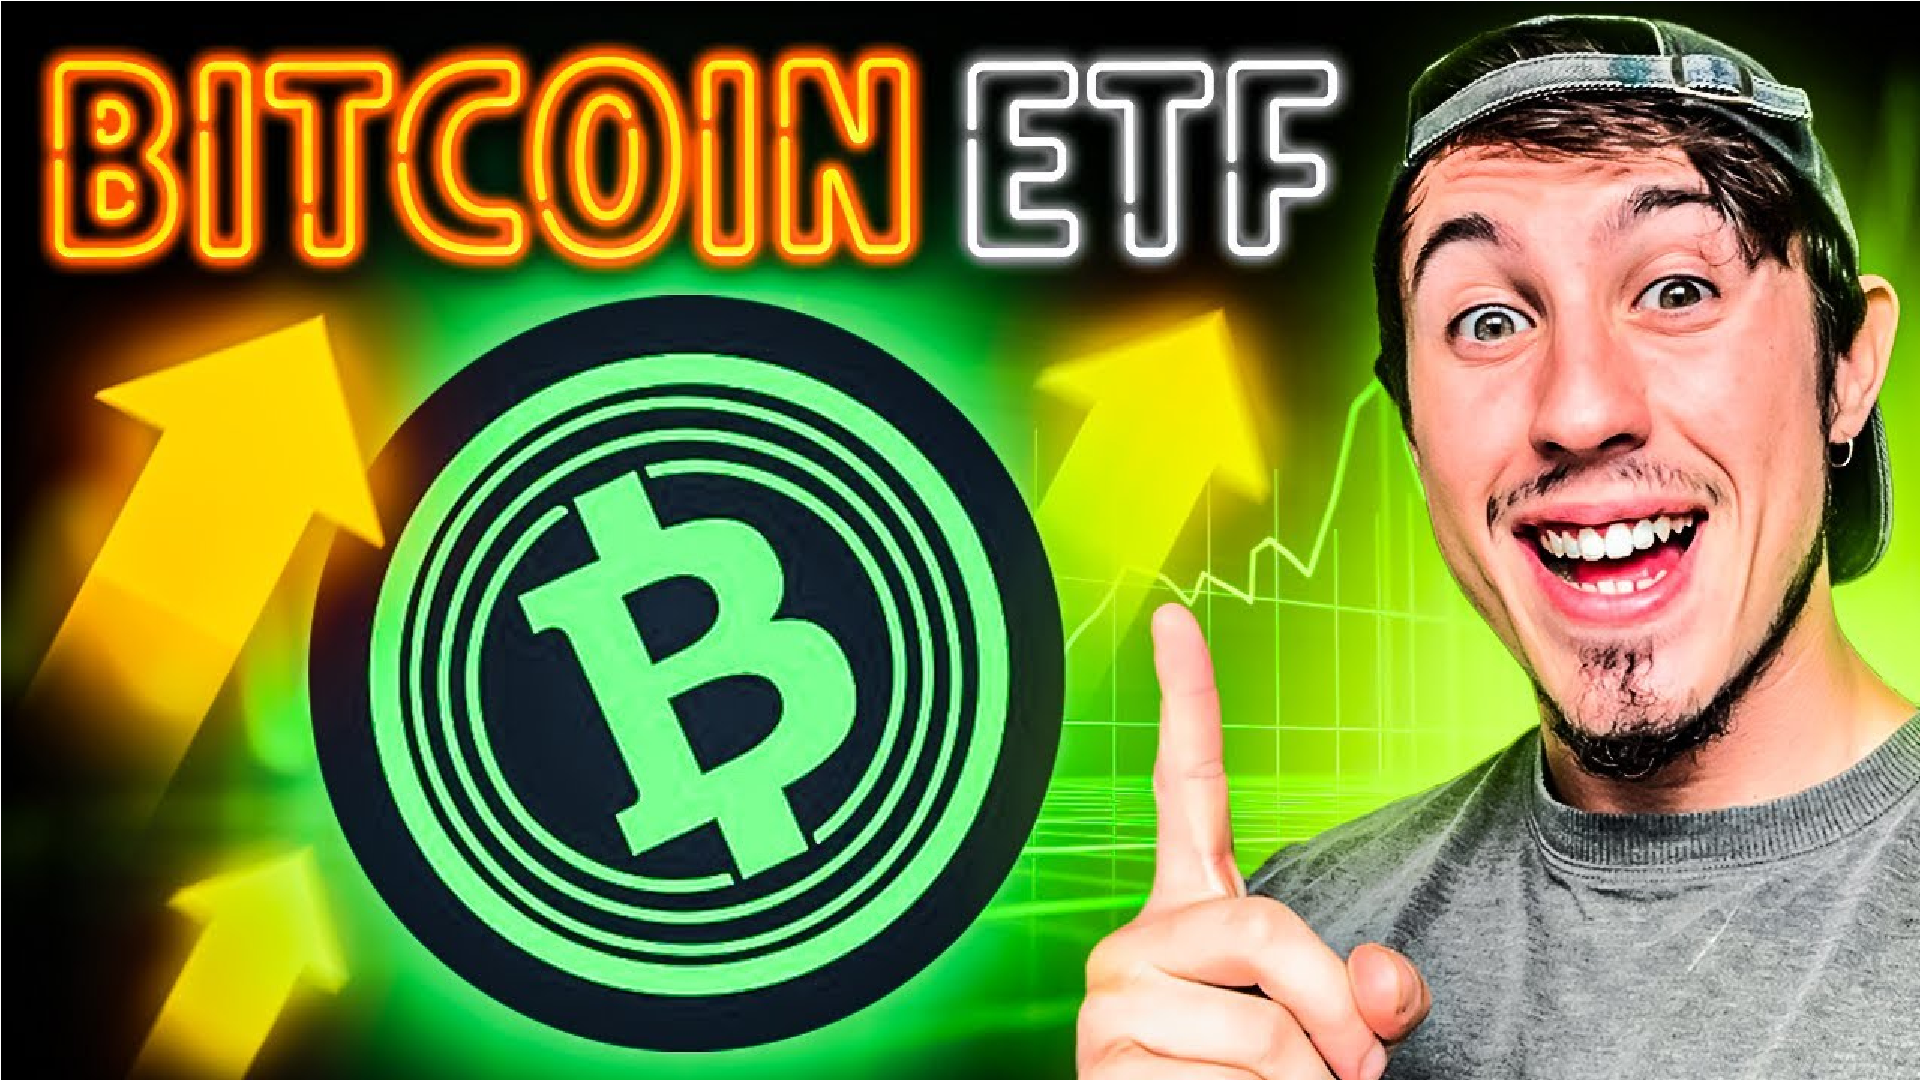 New Crypto Presale Raises Over $200K – Is BTCETF The Best Deflationary Altcoin To Buy Now